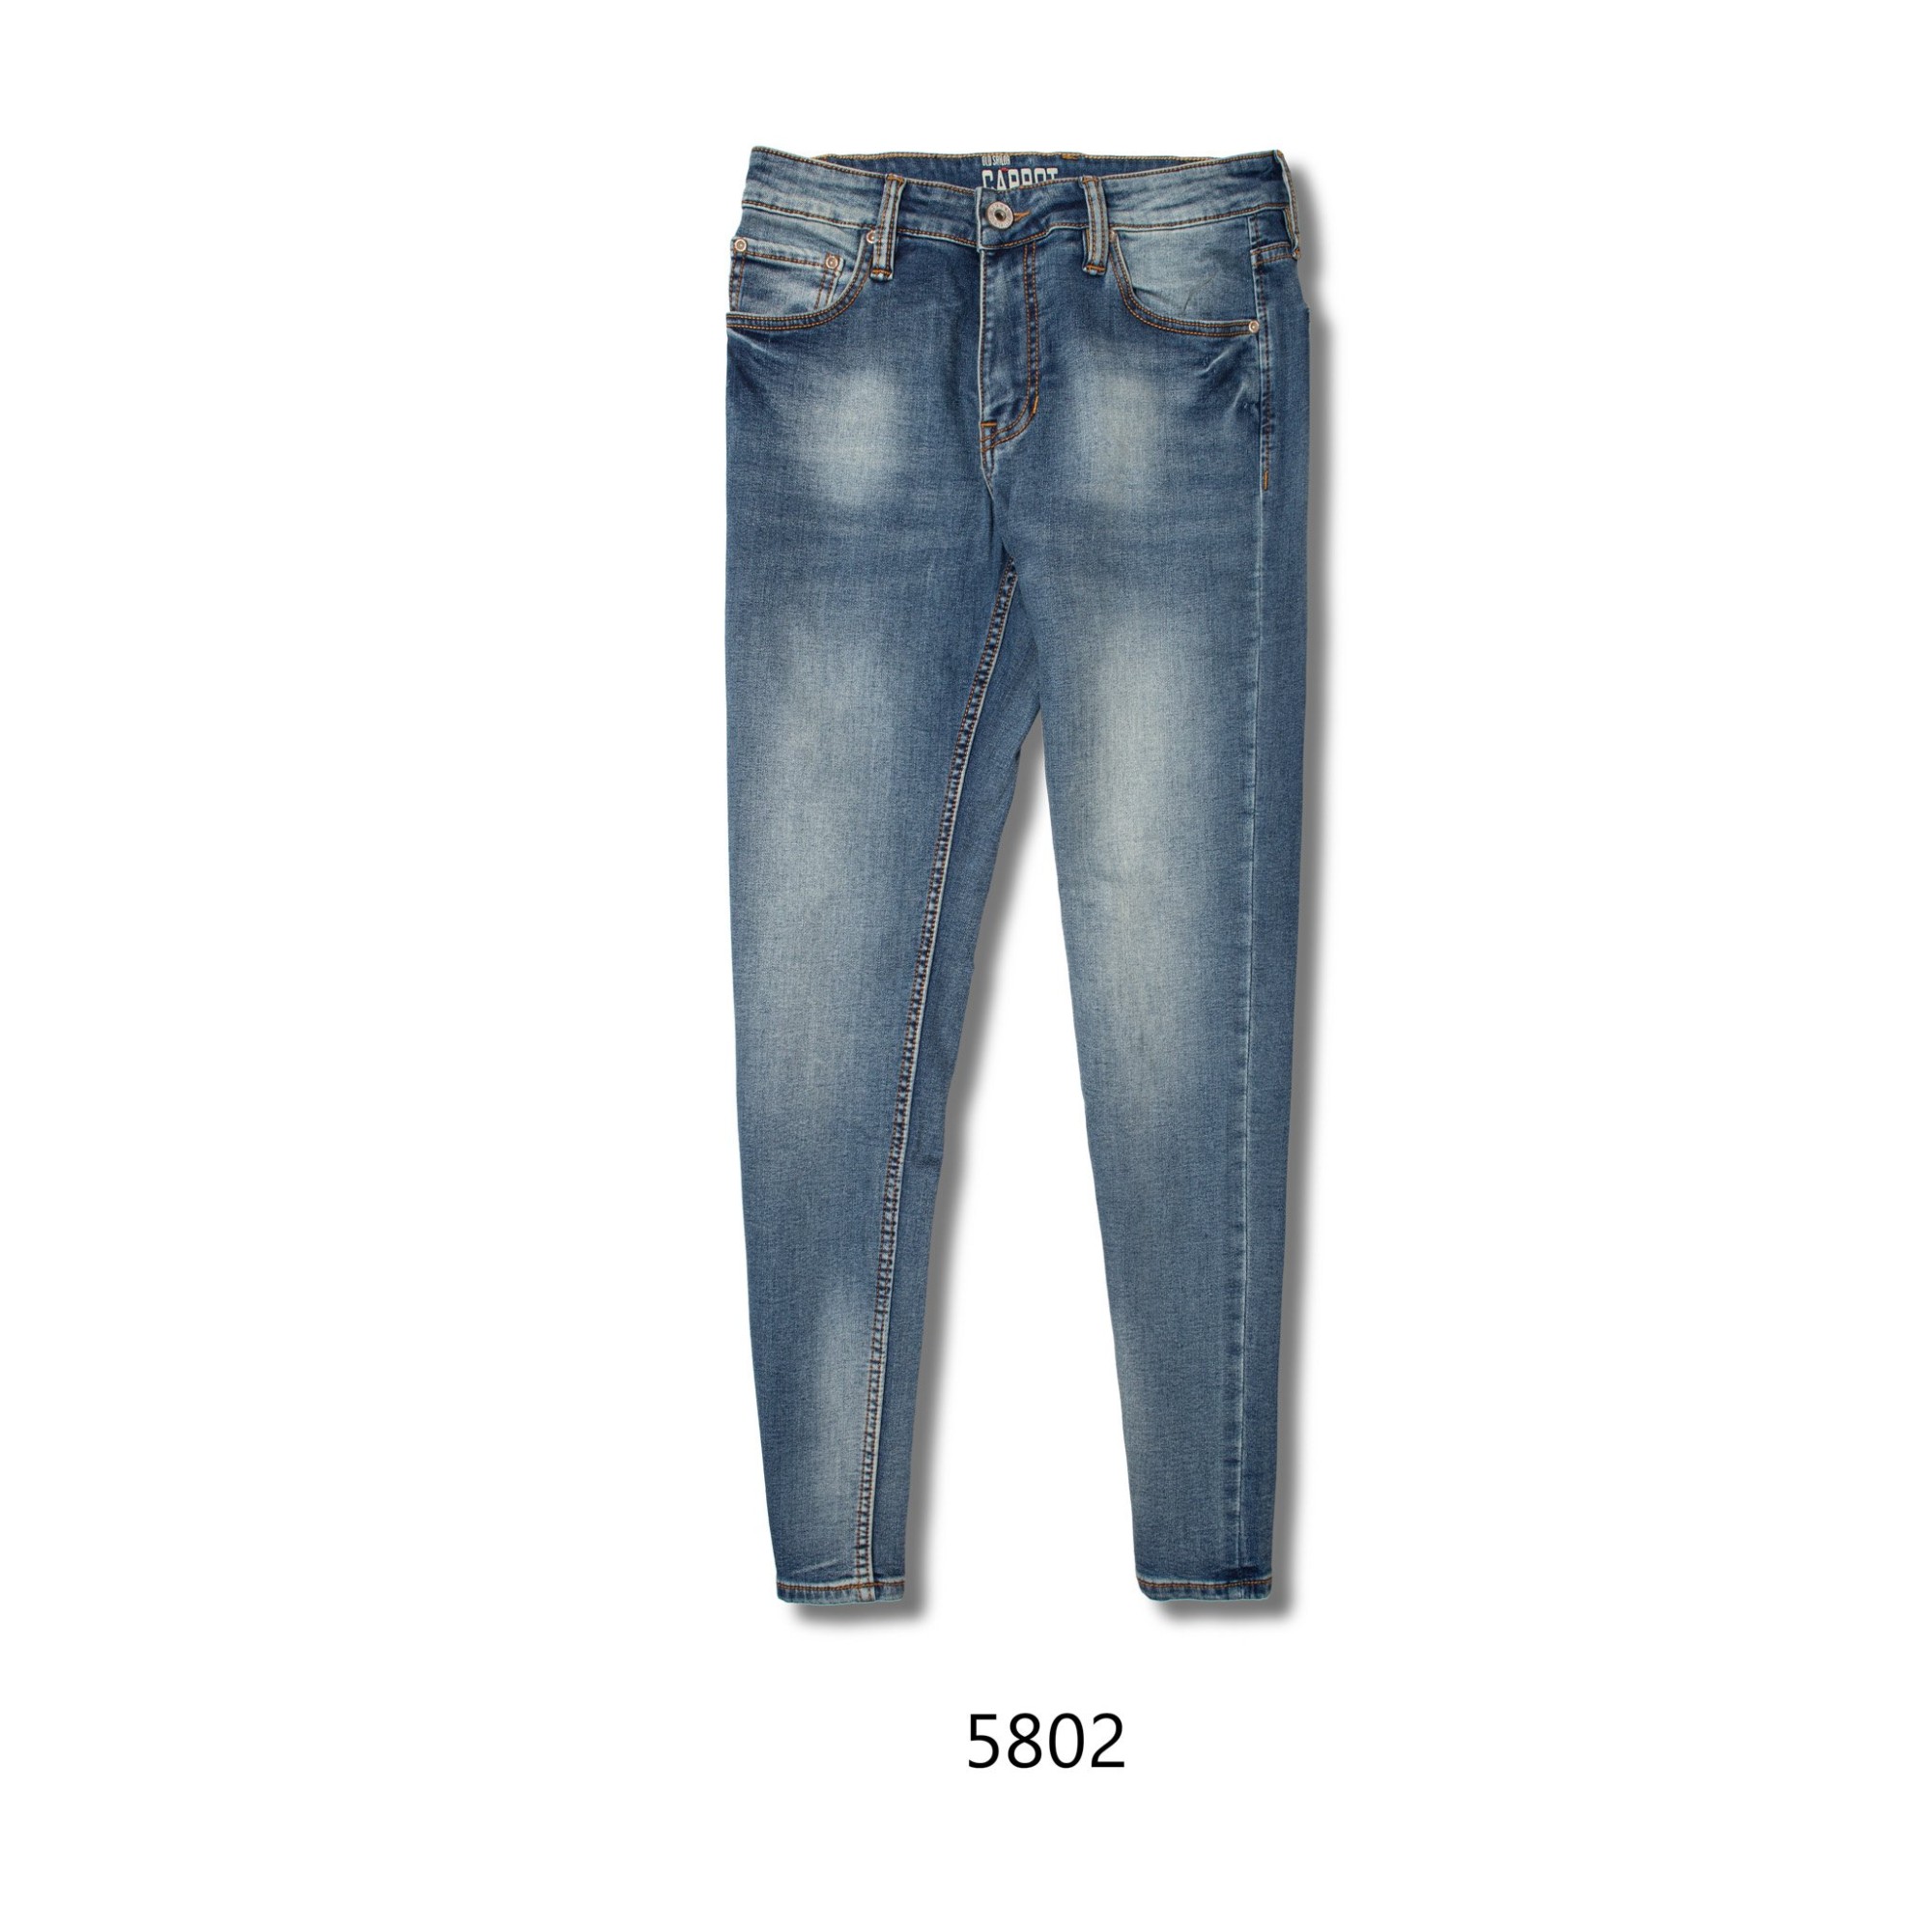 Quần Jean Old Sailor -  O.S.L CARROT JEAN - 5802 - big size up to 42